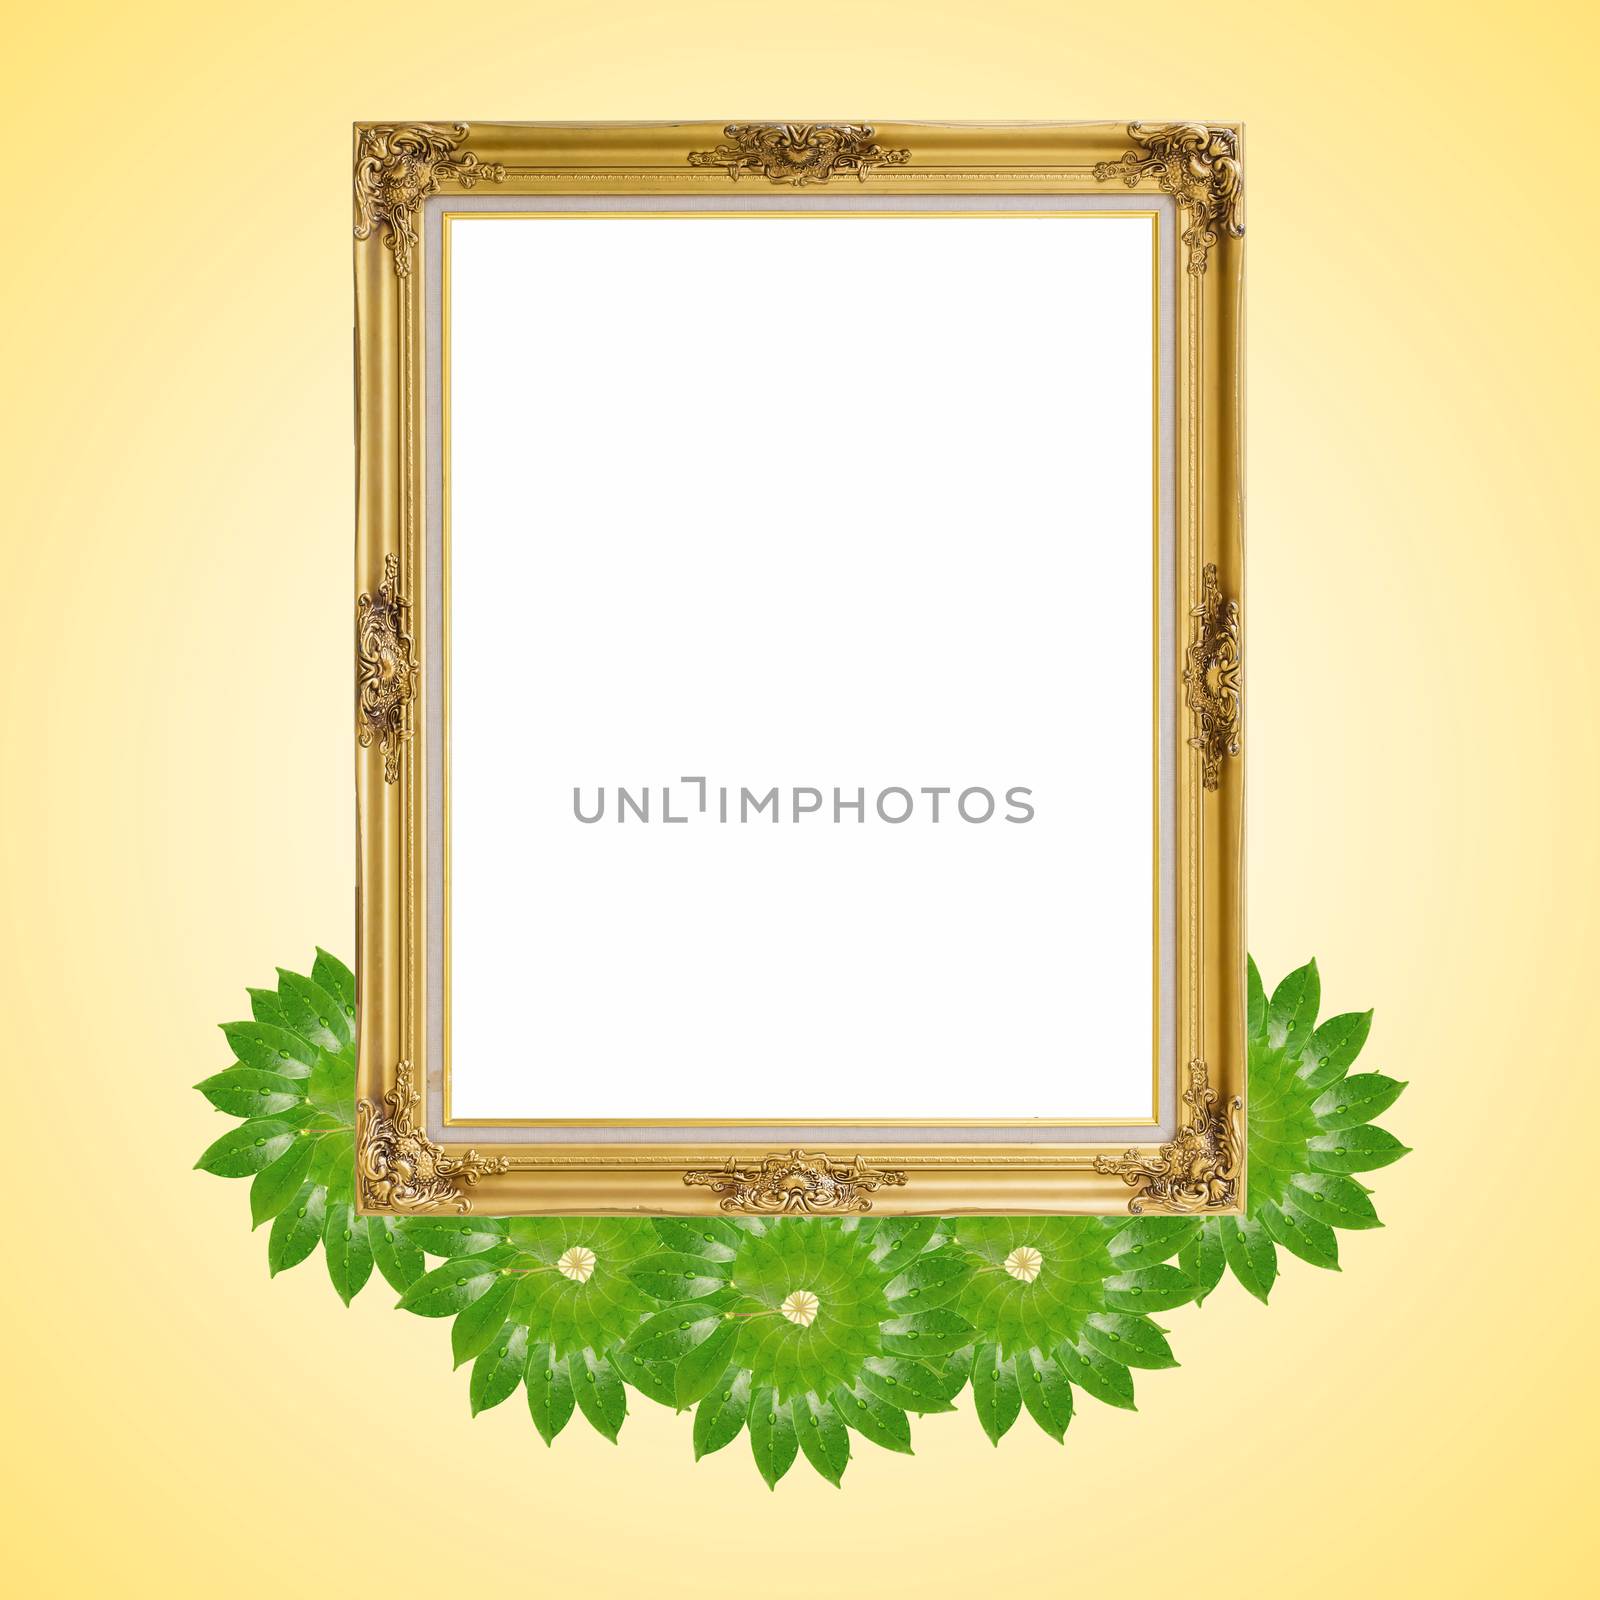 Gold louise and leaves photo frame isolated white background